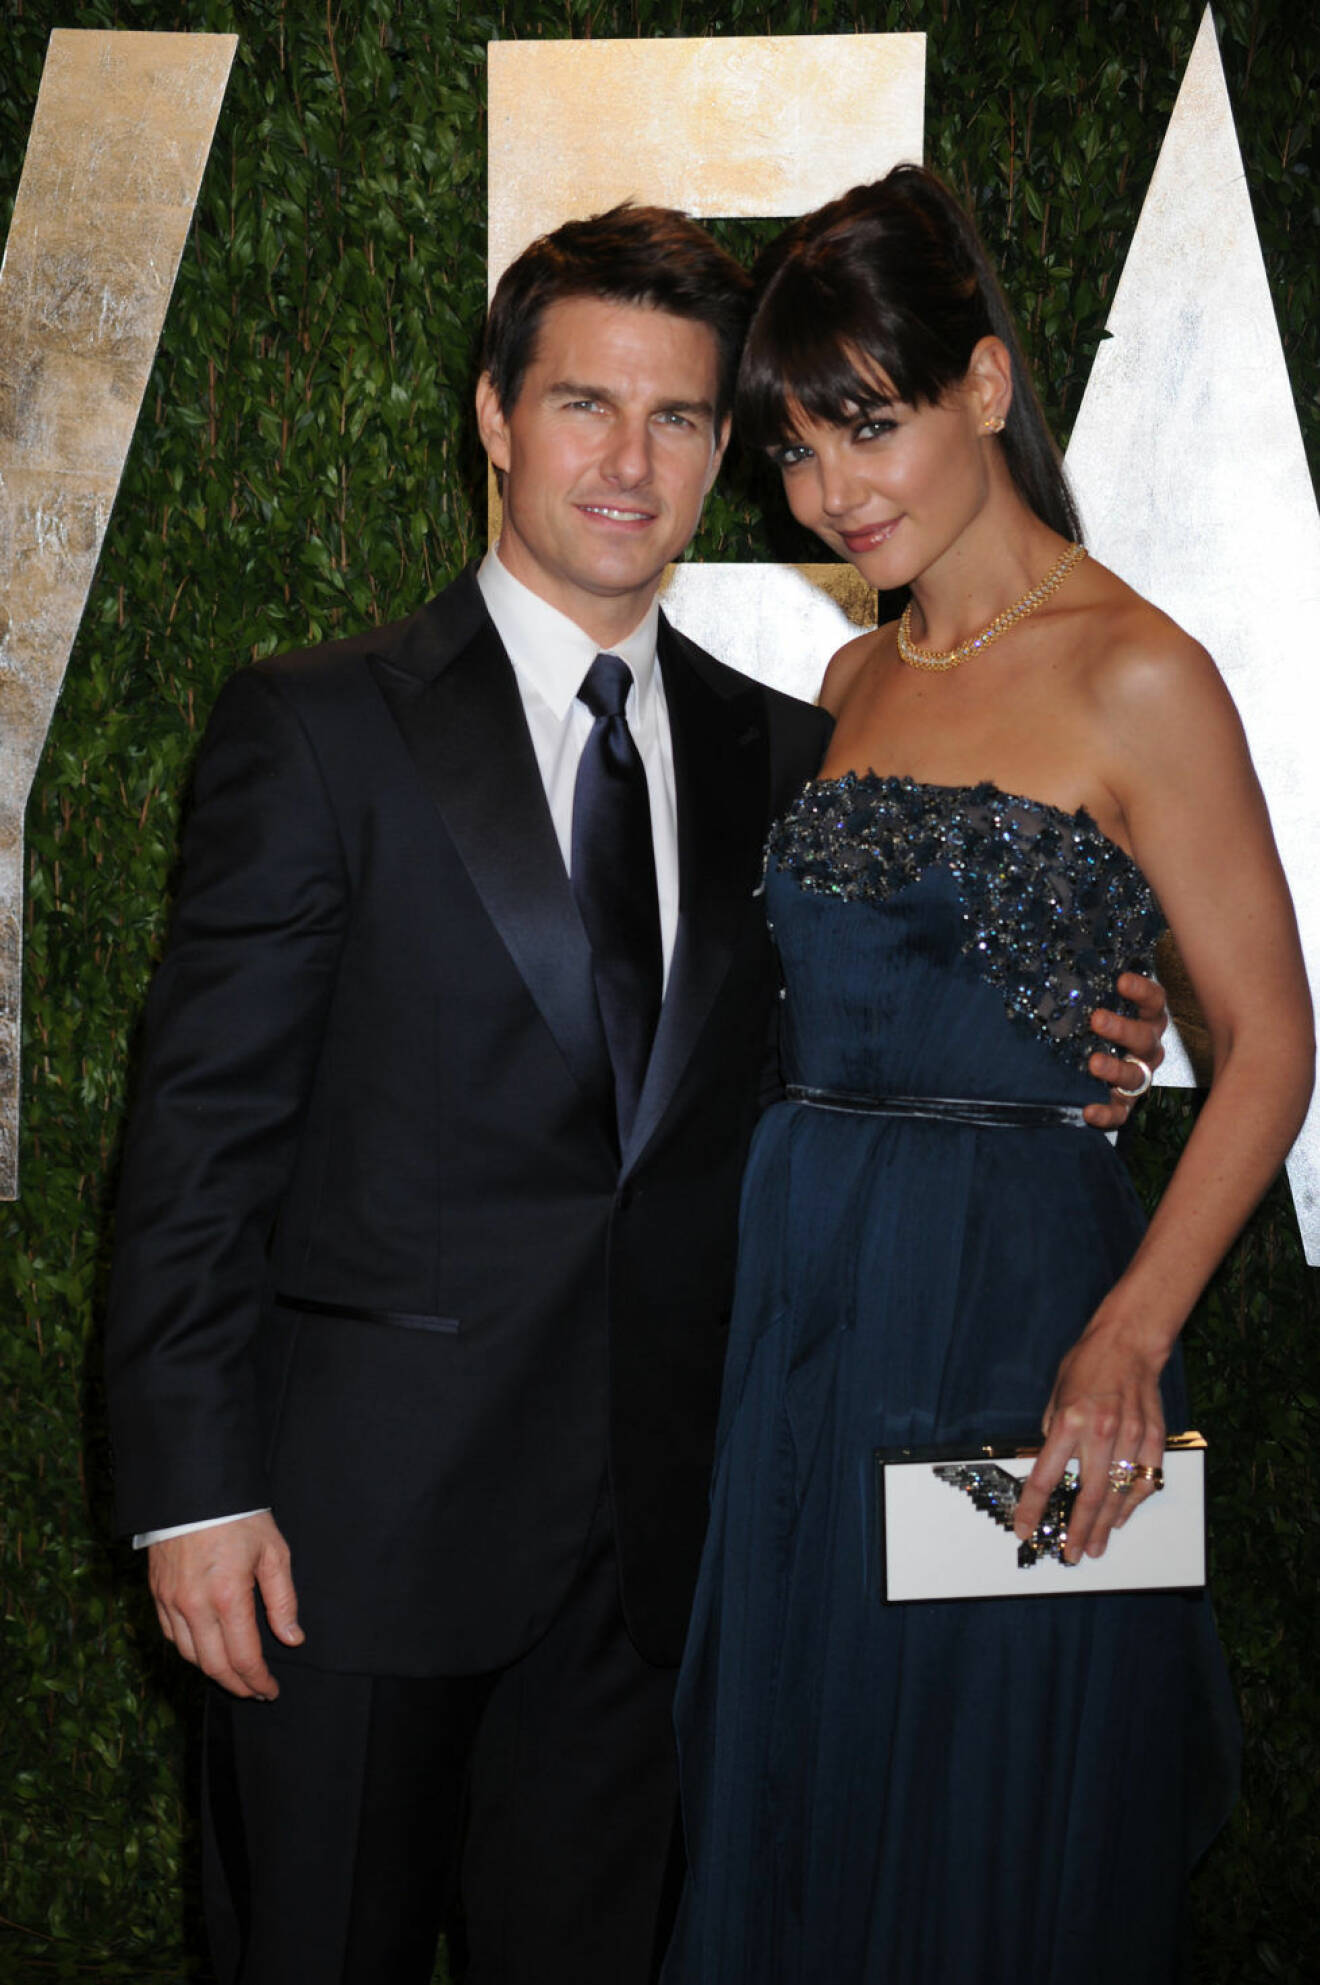 Tom Cruise and Katie Holmes attend the 2012 Vanity Fair Oscar Party hosted by Graydon Carter